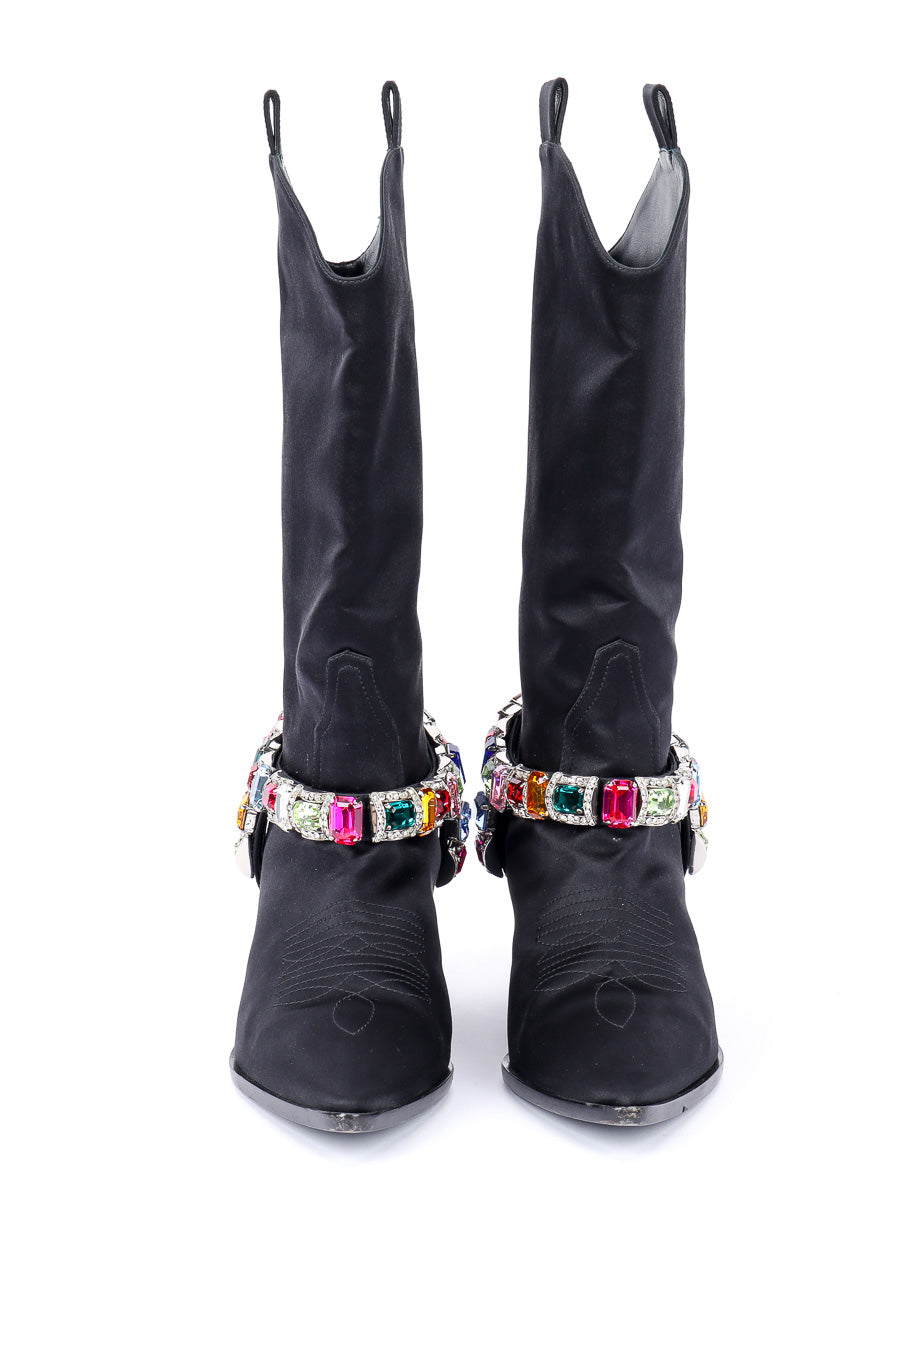 2018 F/W Bejeweled Satin Boots front view on white background @Recessla